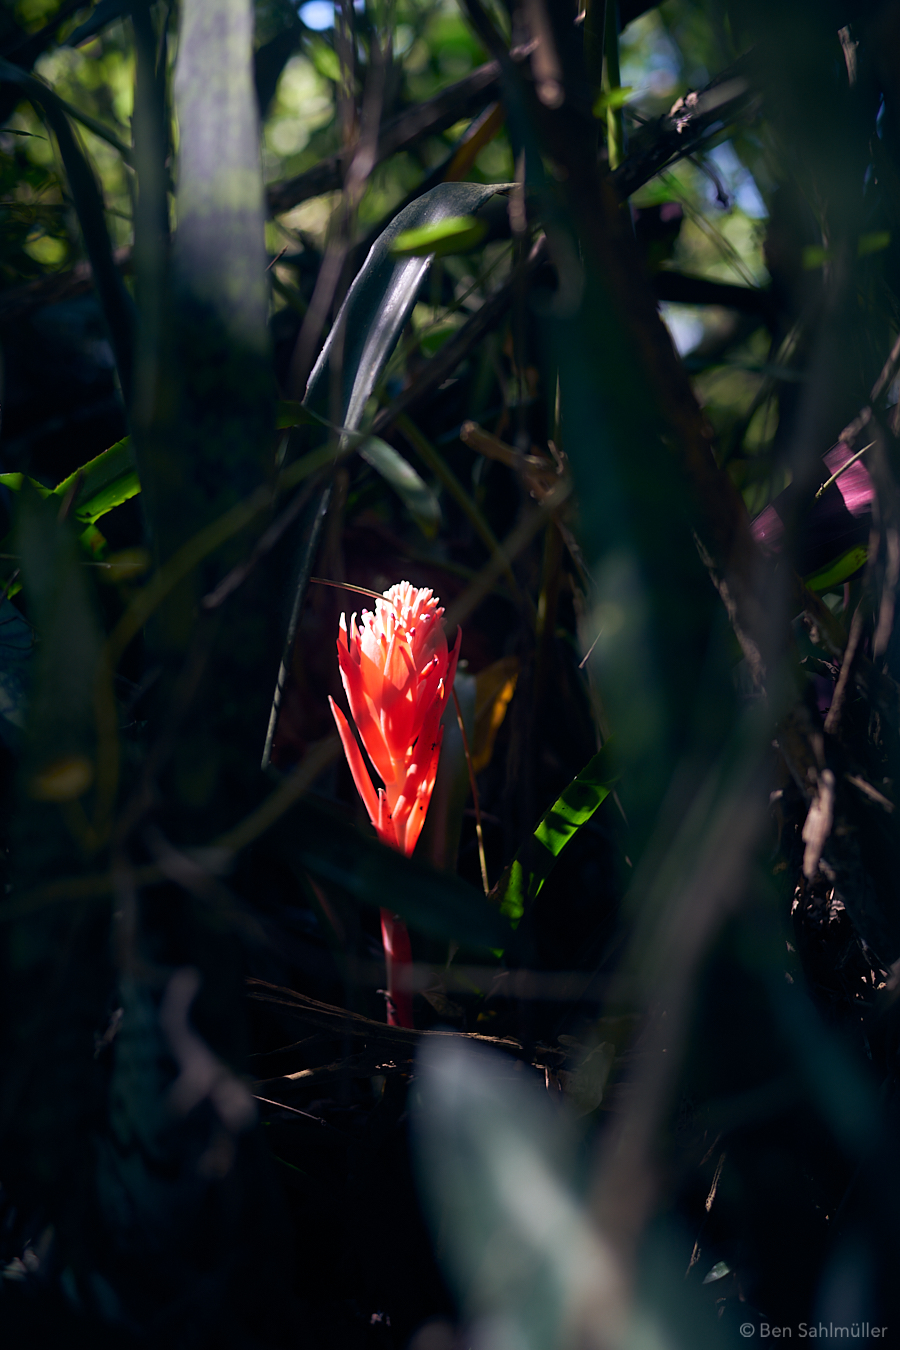 A red blossom on the dark forest grounds, burning in the sun's rays.